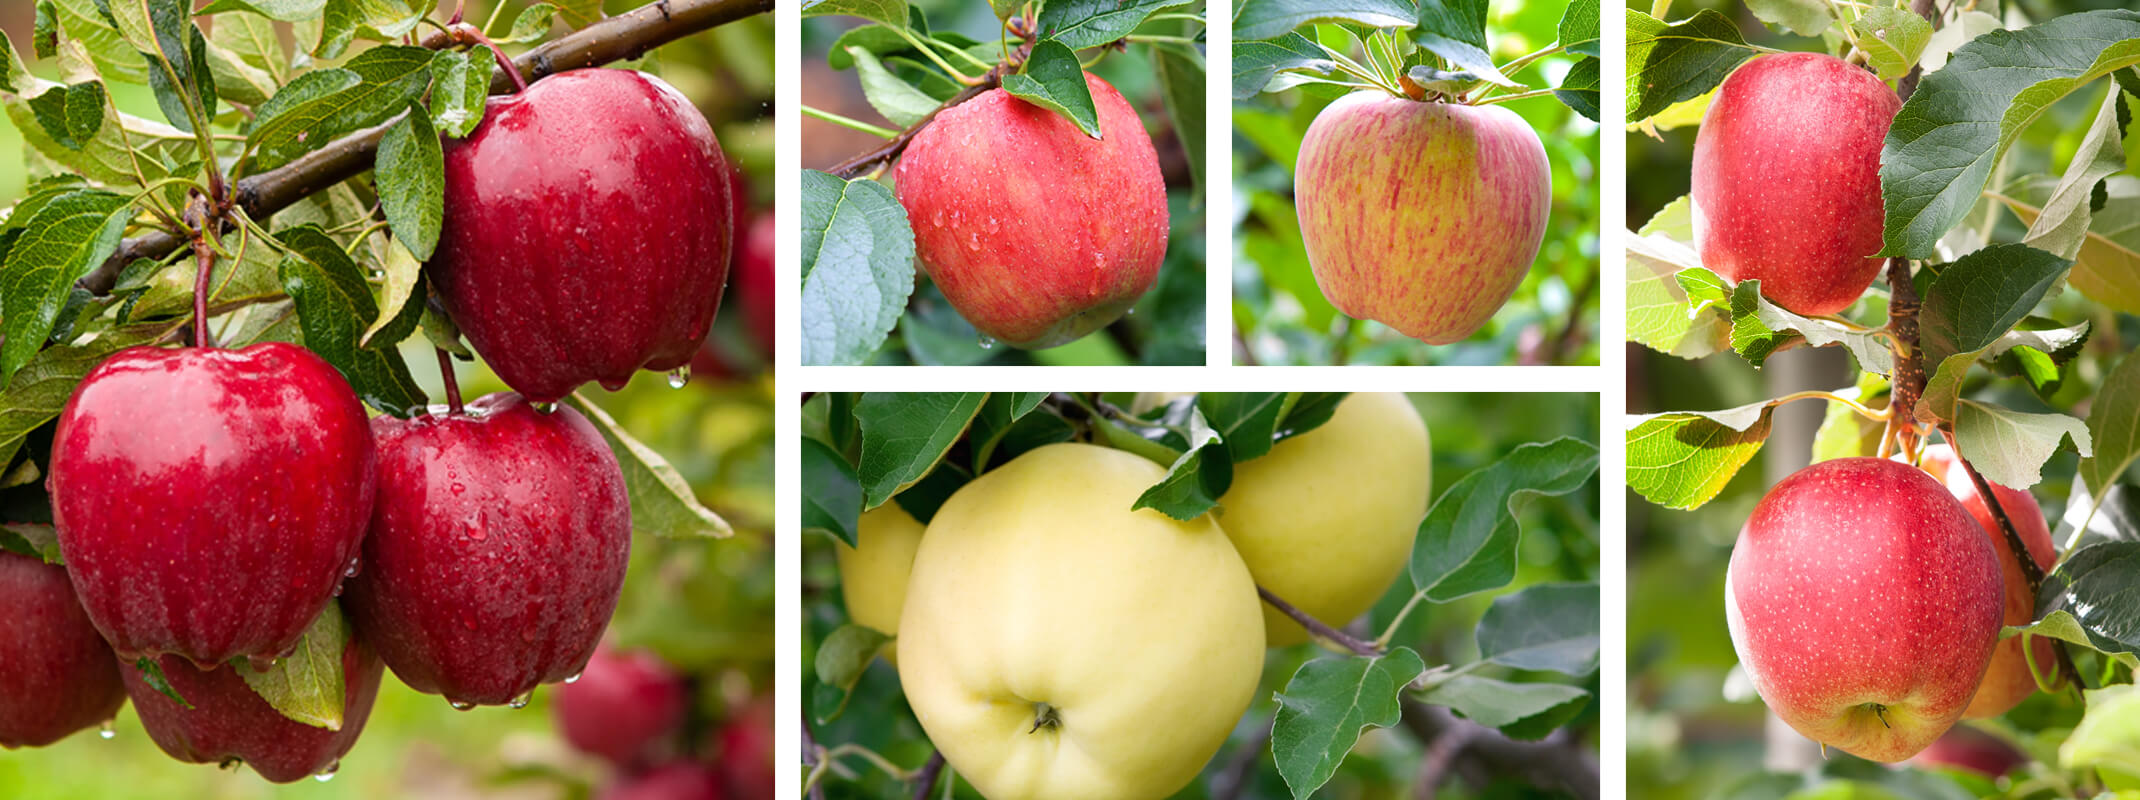 assorted apples on tree, red and golden delicious, fuji, gala, and braeburn,